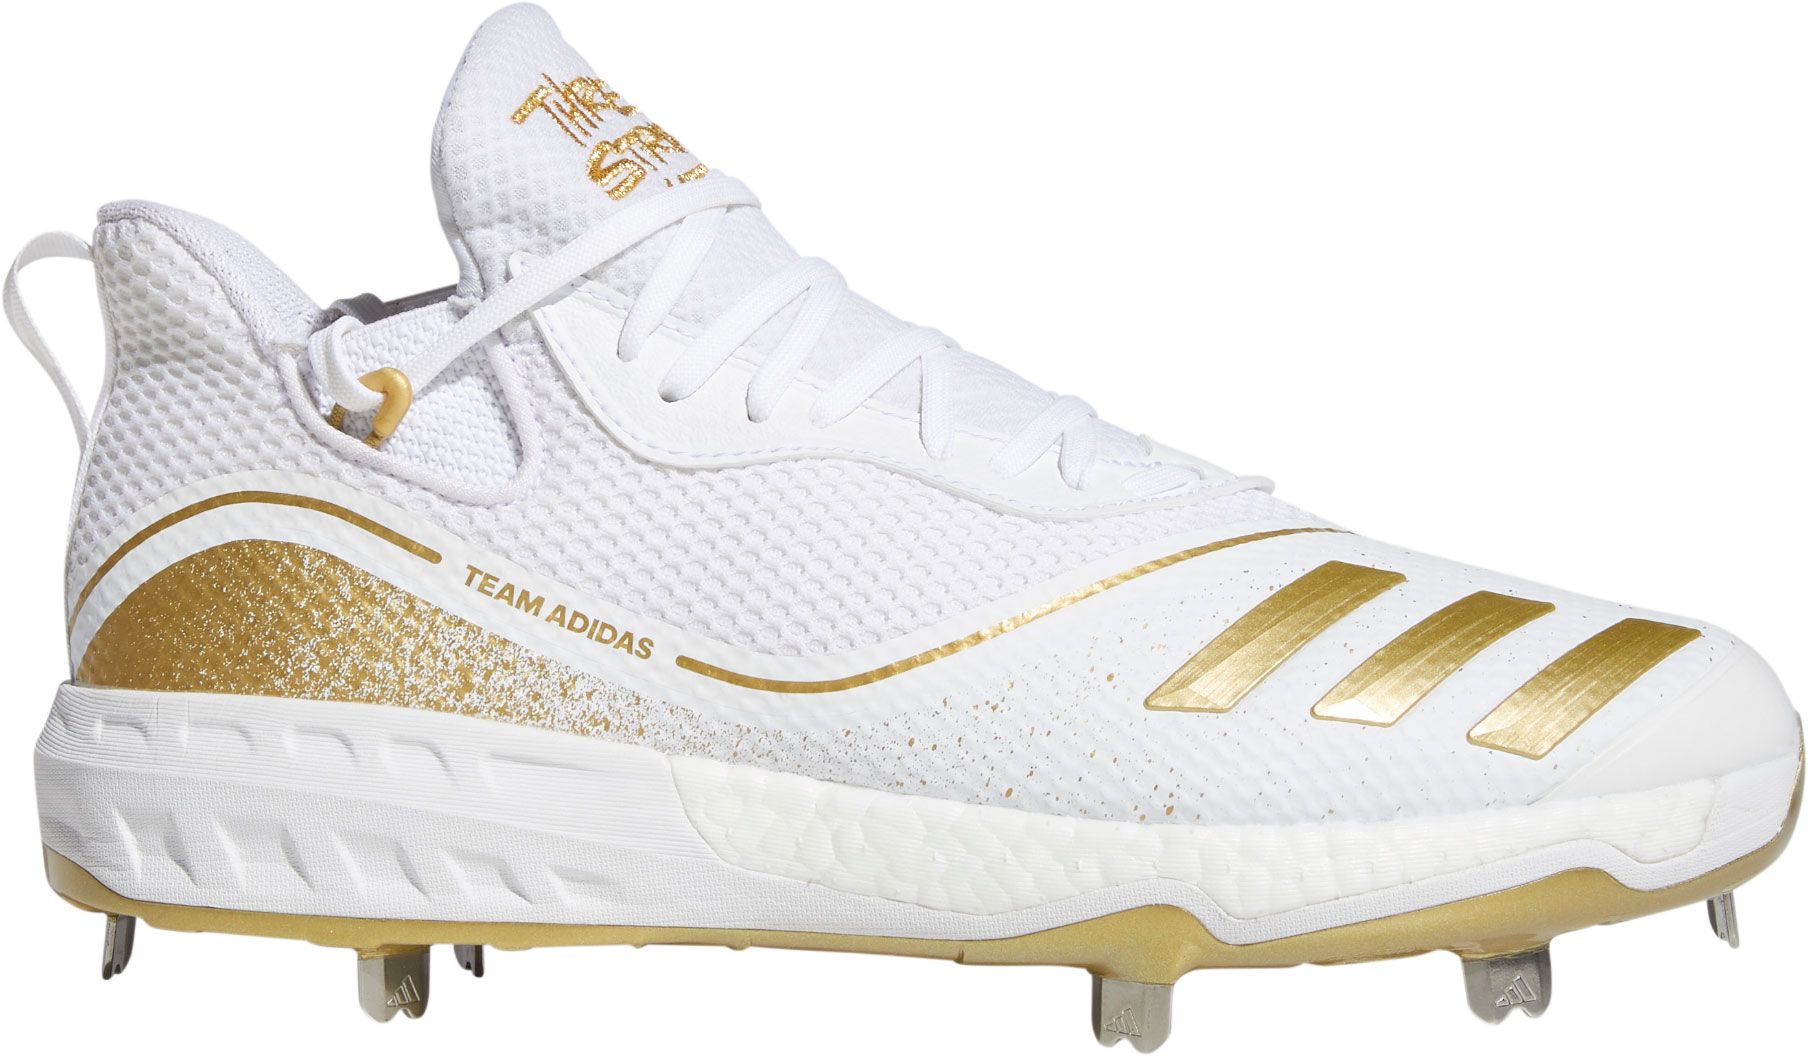 all white metal cleats